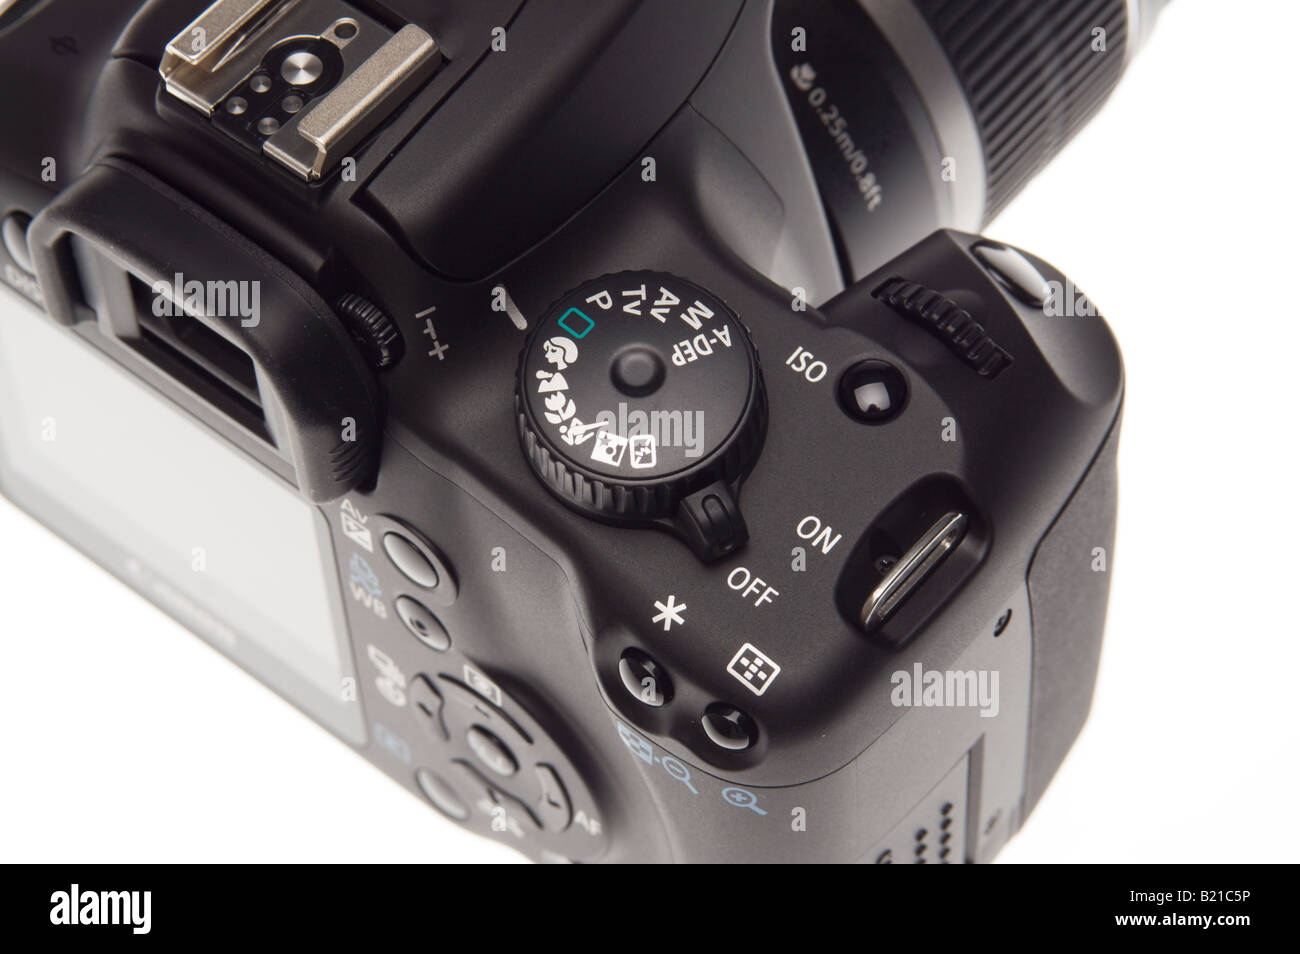 Canon EOS 1000D digital SLR camera July 2008 launch product shot main  control section Stock Photo - Alamy